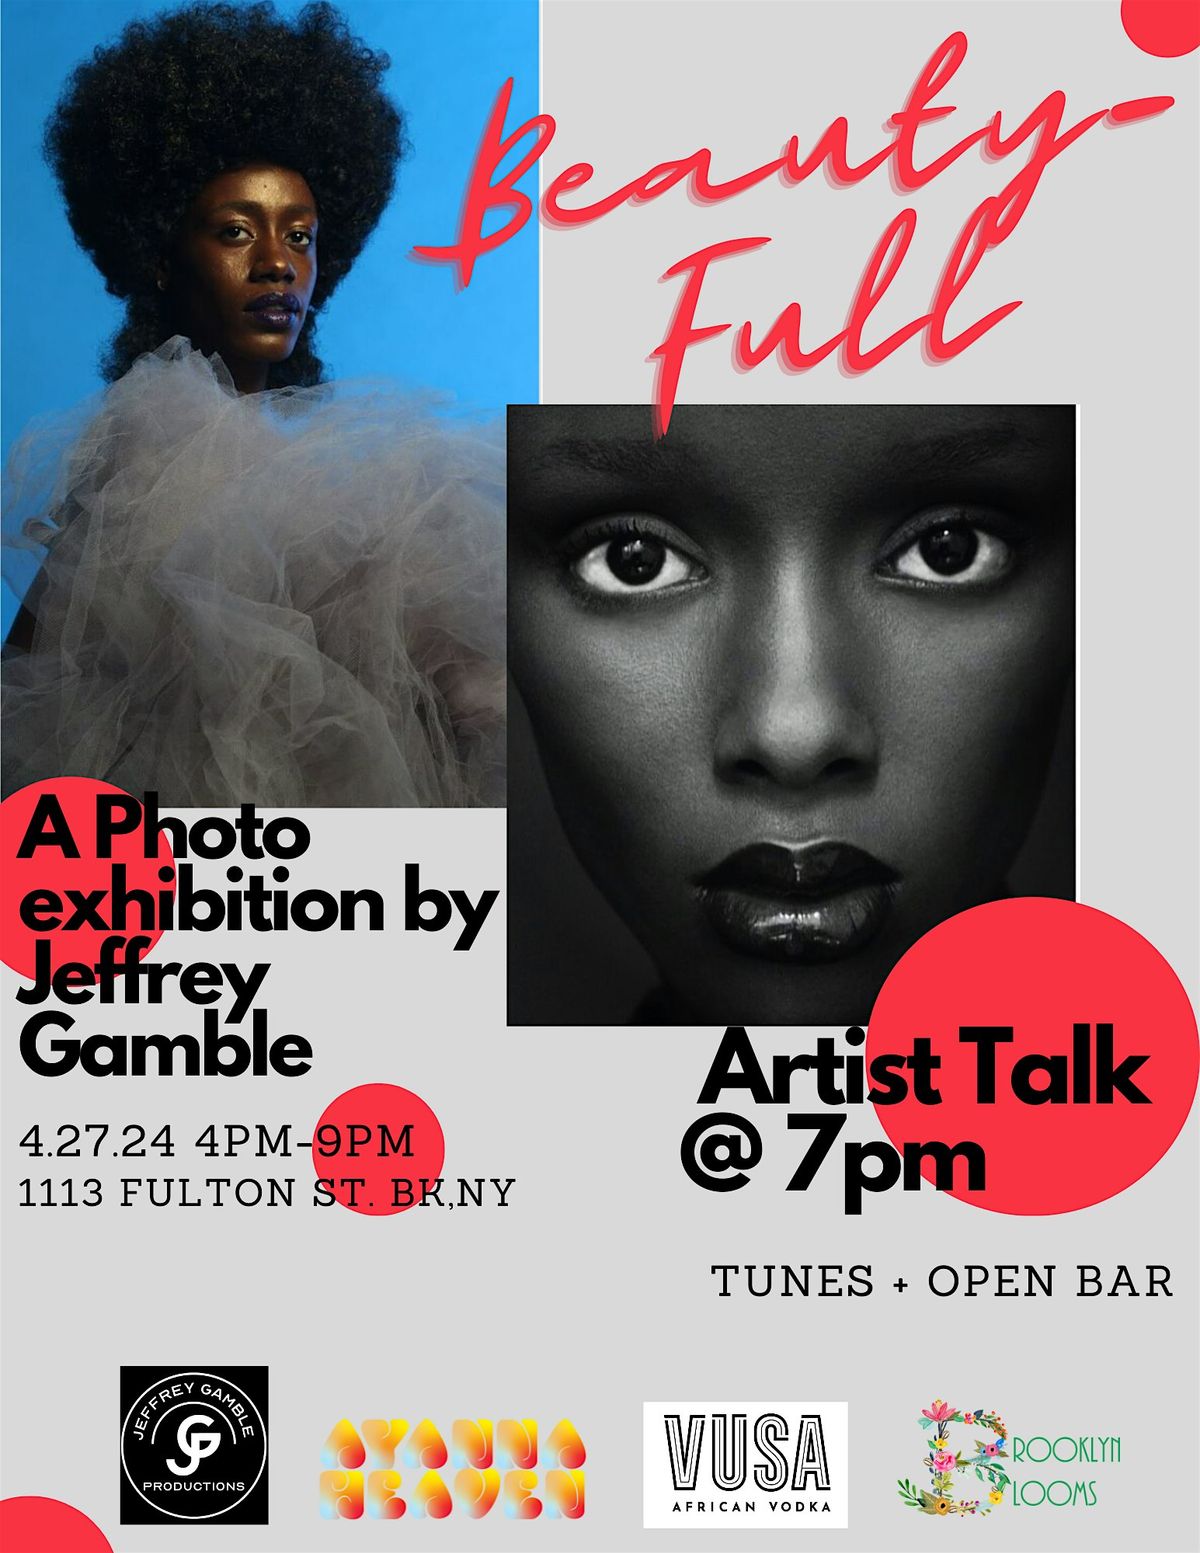 Beauty-FULL , A photo exhibition by Jeffrey Gamble